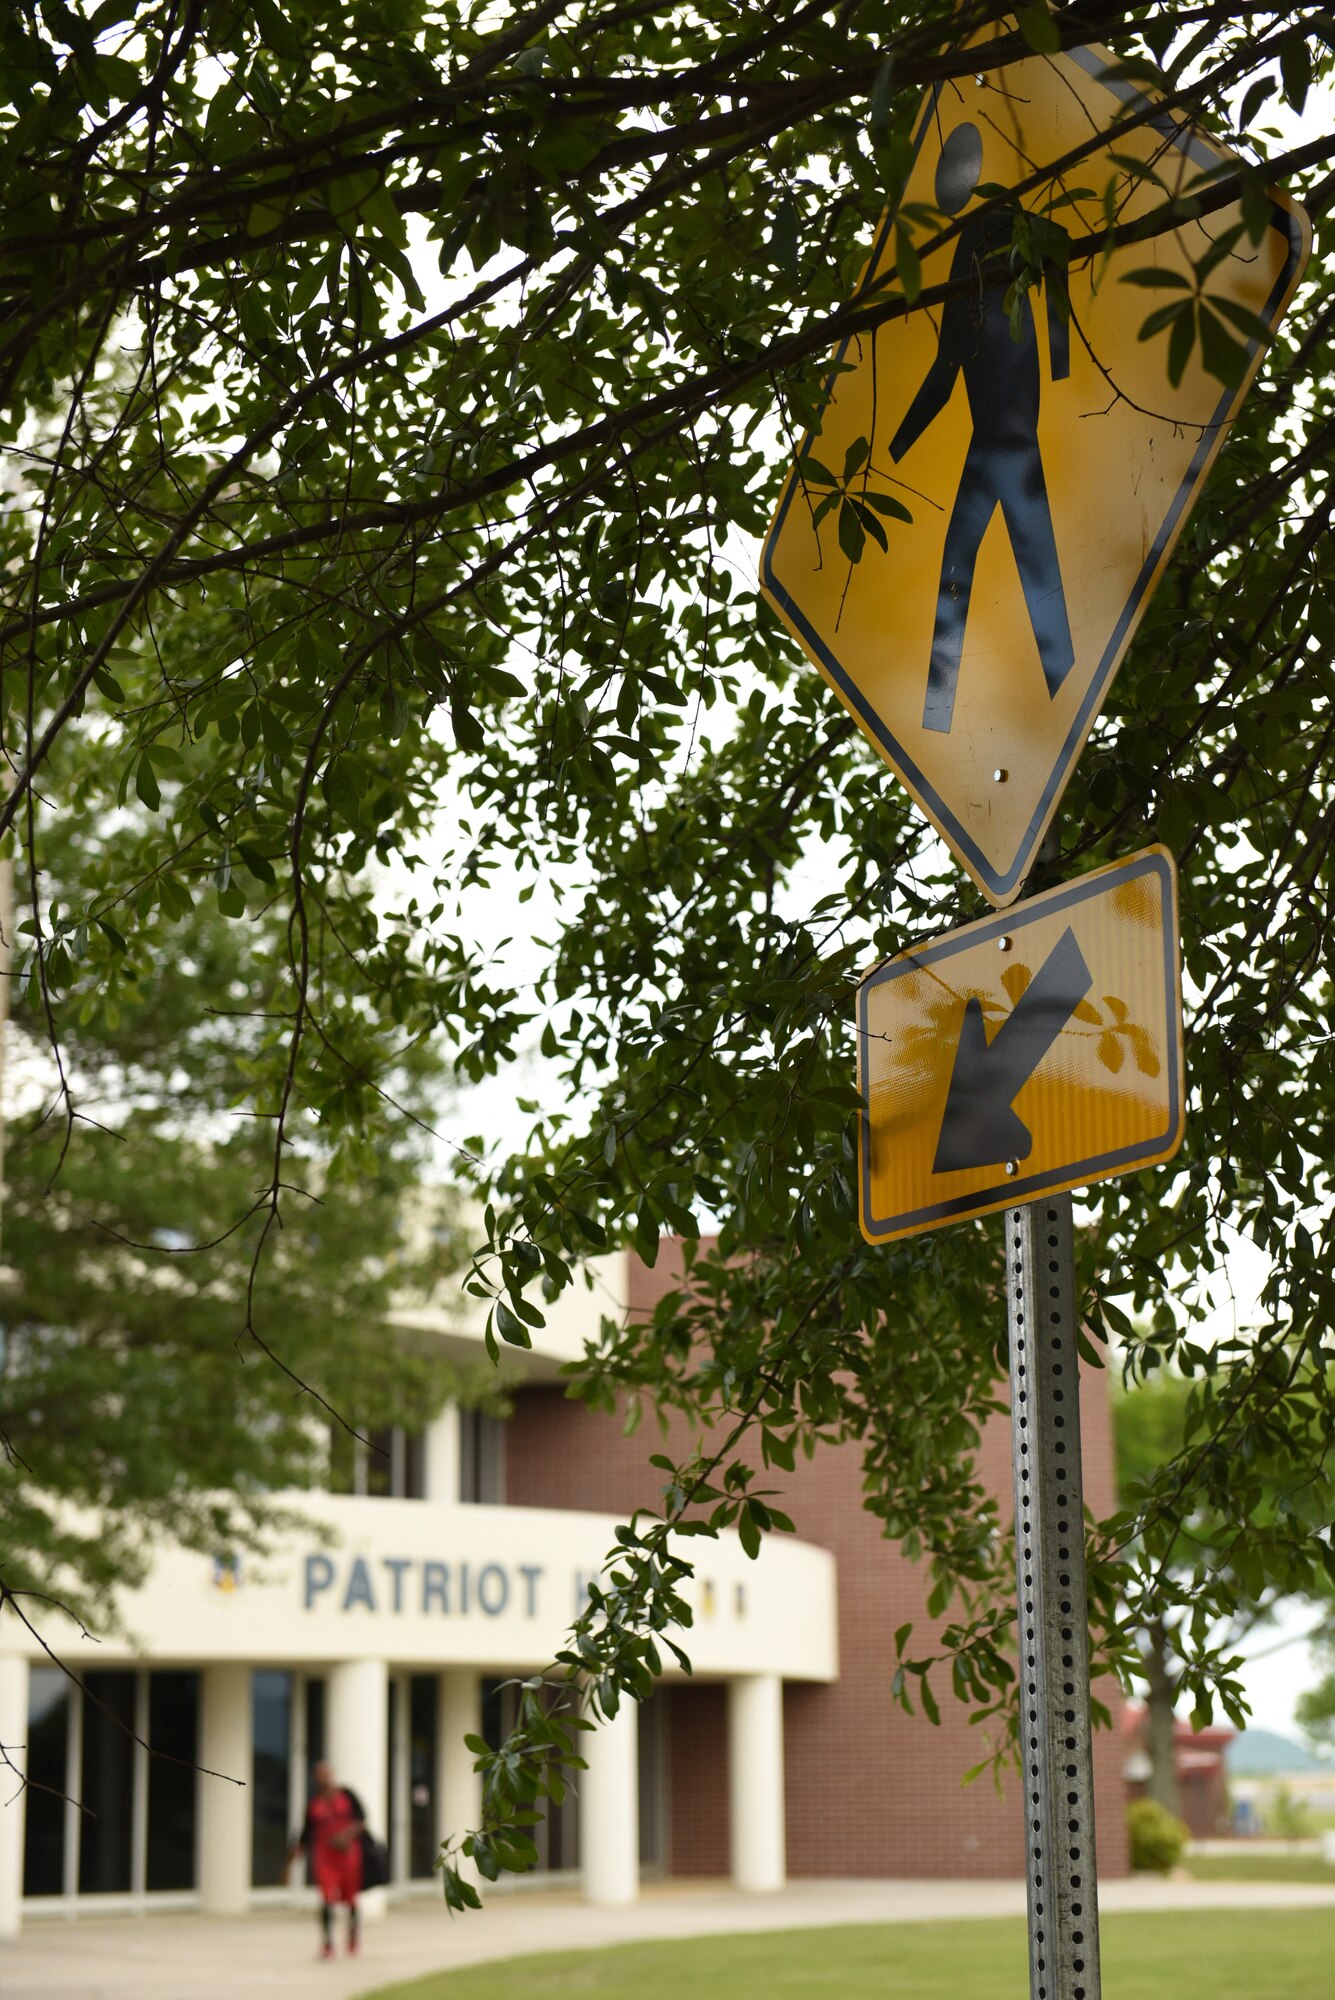 MCGHEE TYSON AIR NATIONAL GUARD BASE, Tenn. - Tree branches grow past a crosswalk sign here May 6, 2016, in the parking lot outside Patriot Hall at the I.G. Brown Training and Education Center. (U.S. Air National Guard photo by Master Sgt. Mike R. Smith/Released) 